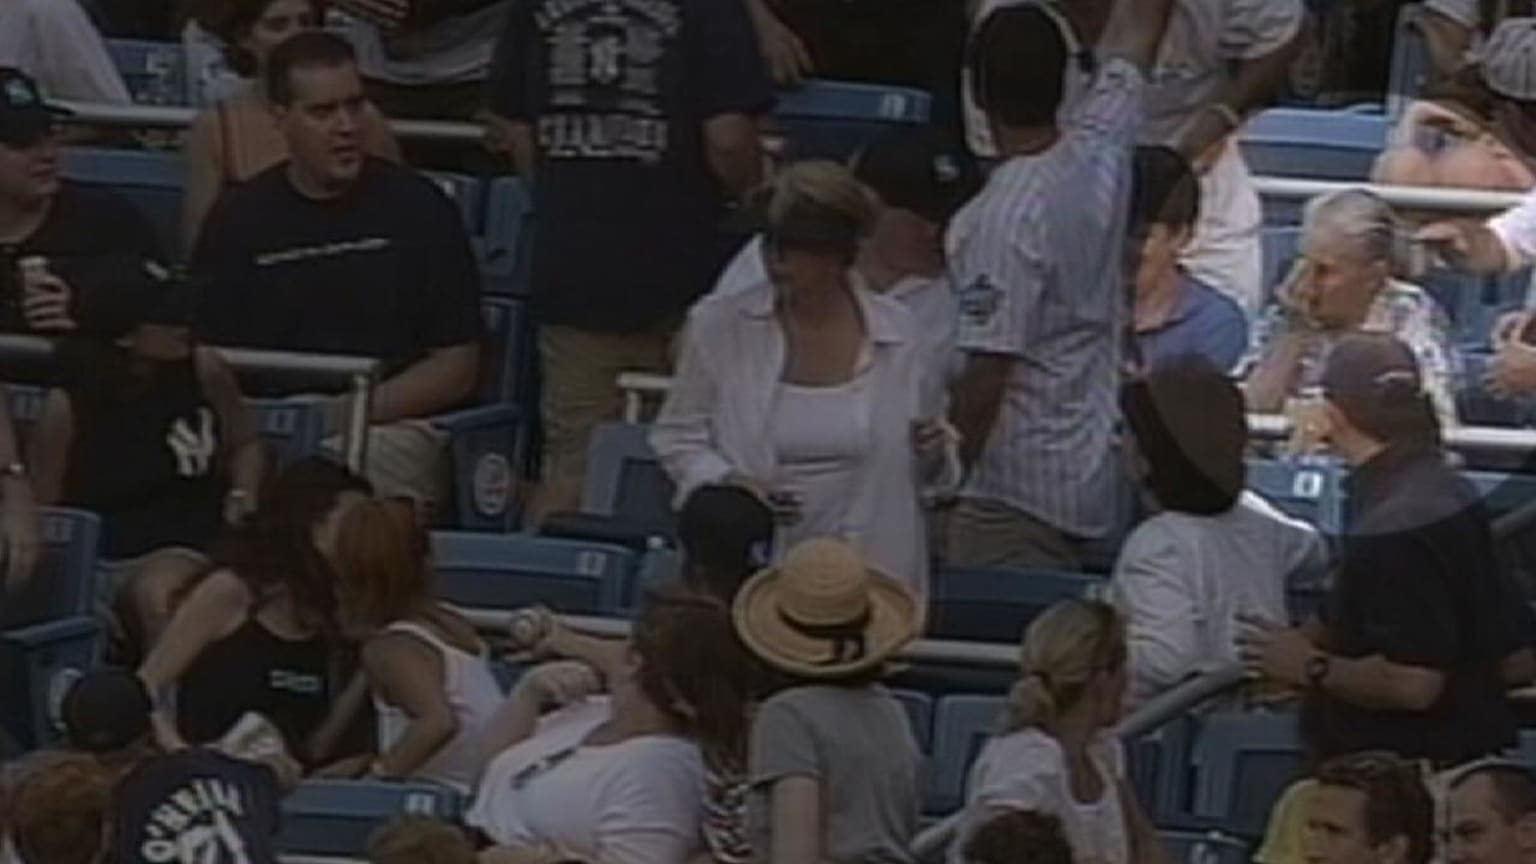 Chuck Knoblauch hits Keith Olbermann's mother with errant throw MLB BLOOPER  